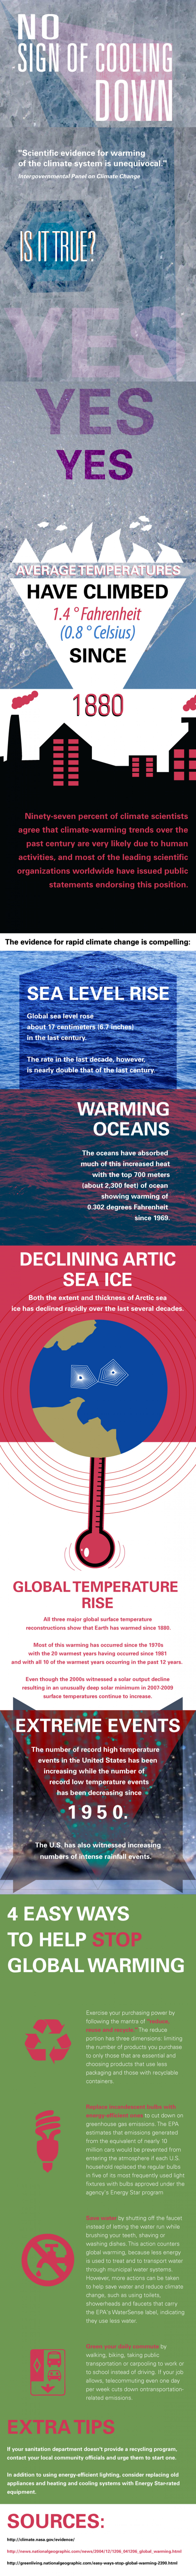 No Sign of Cooling Down Infographic